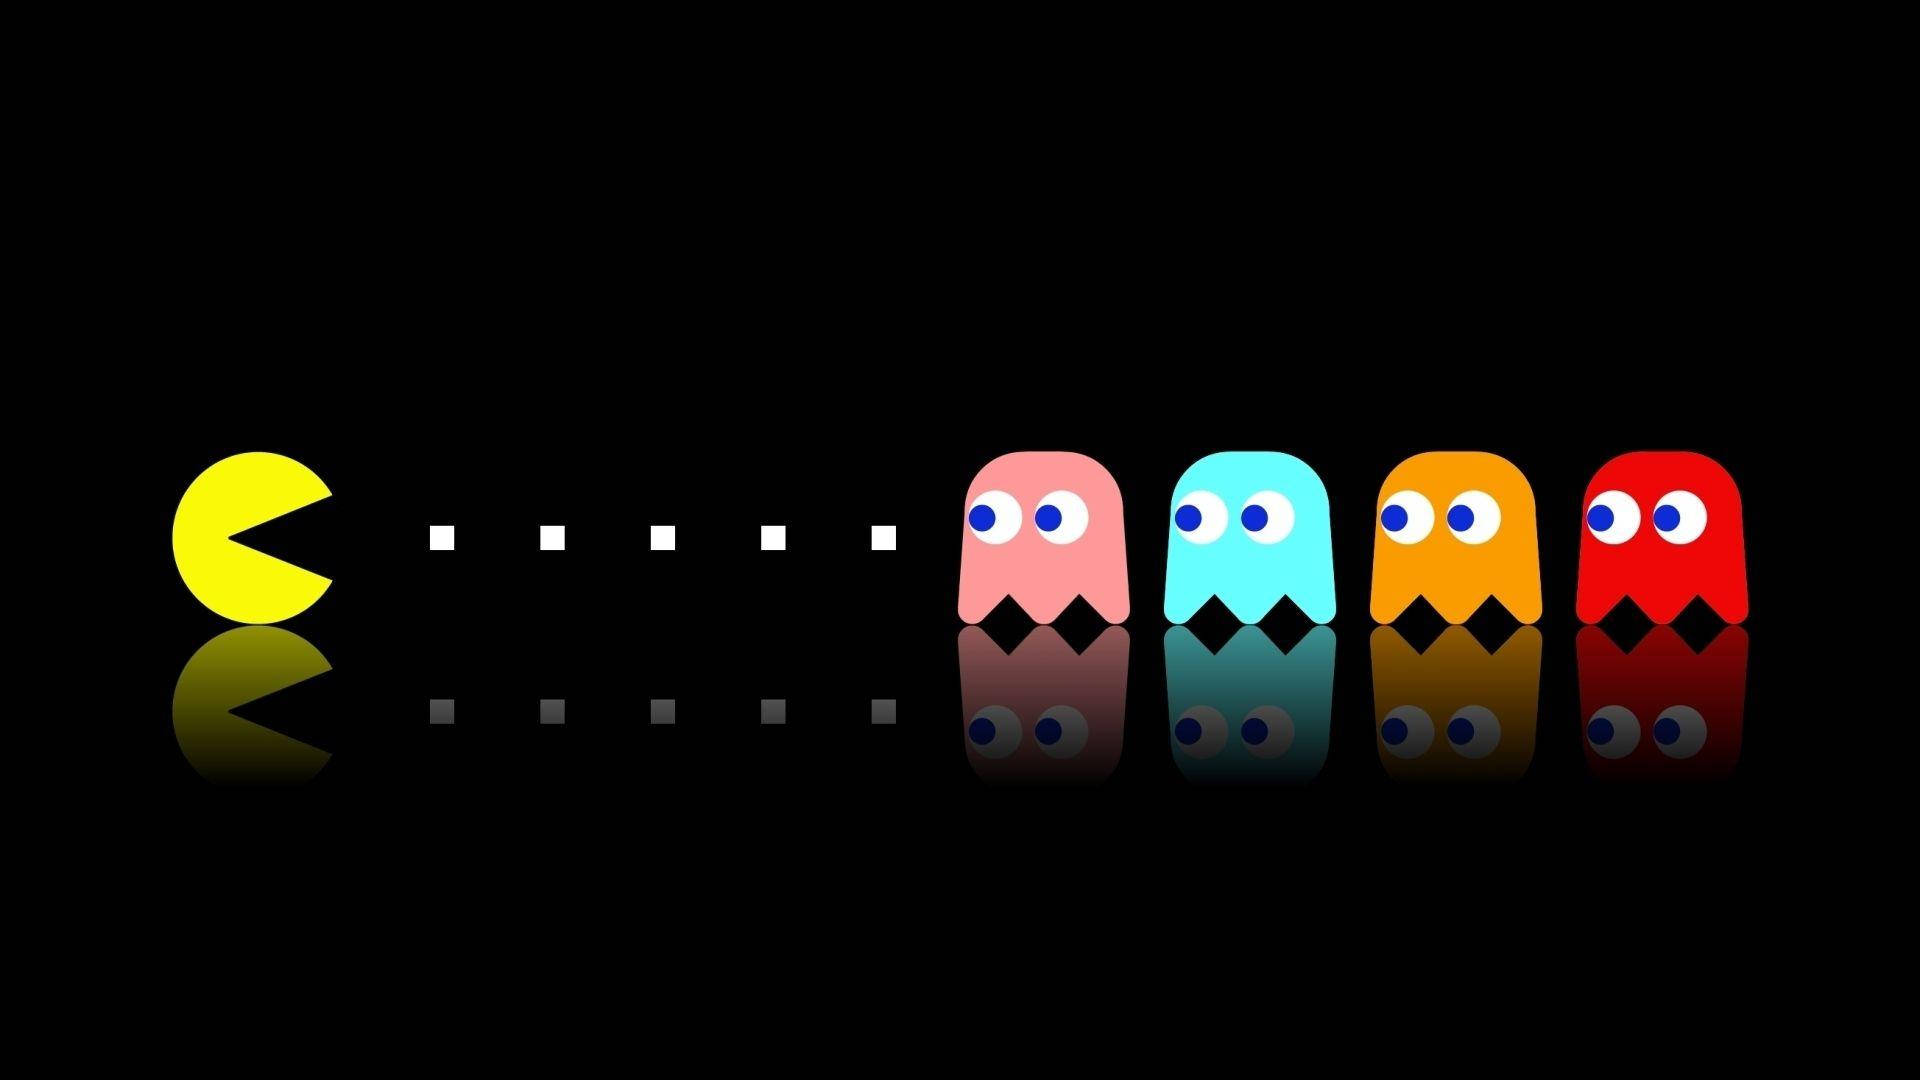 1920x1080 Full Hd Pac-man Eating Ghosts Background